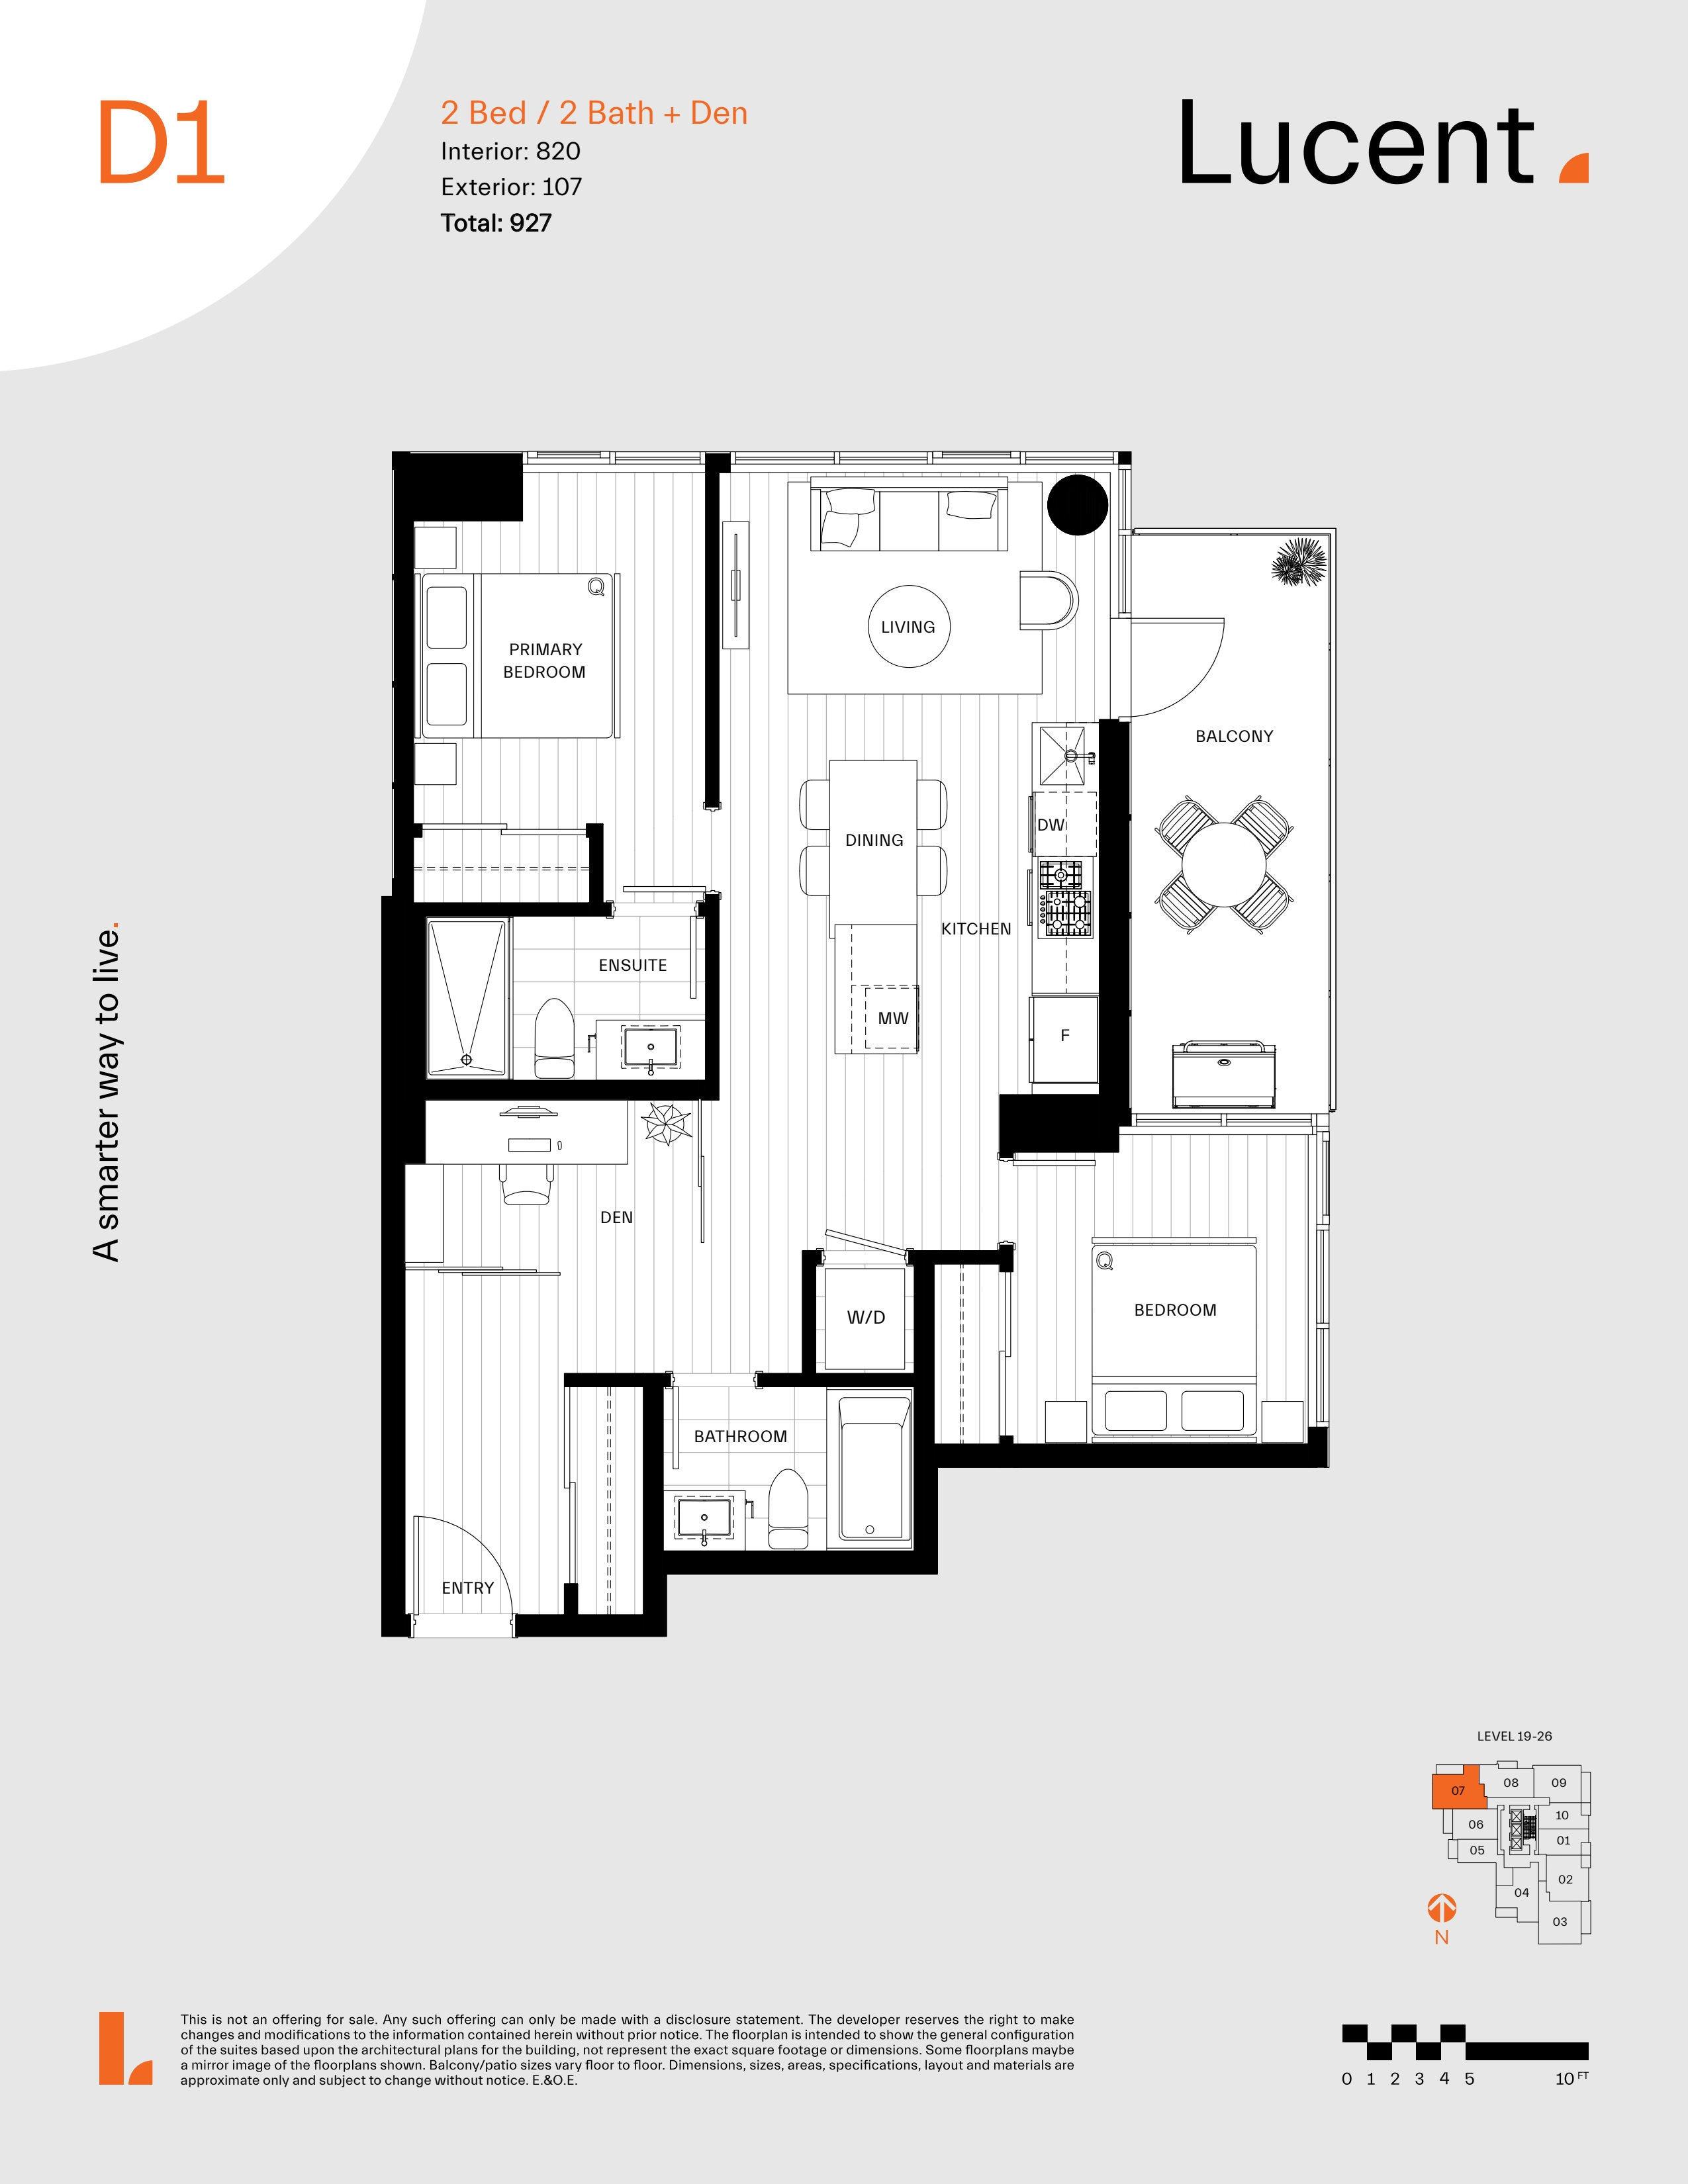 D1 Floor Plan of Lucent Condos with undefined beds